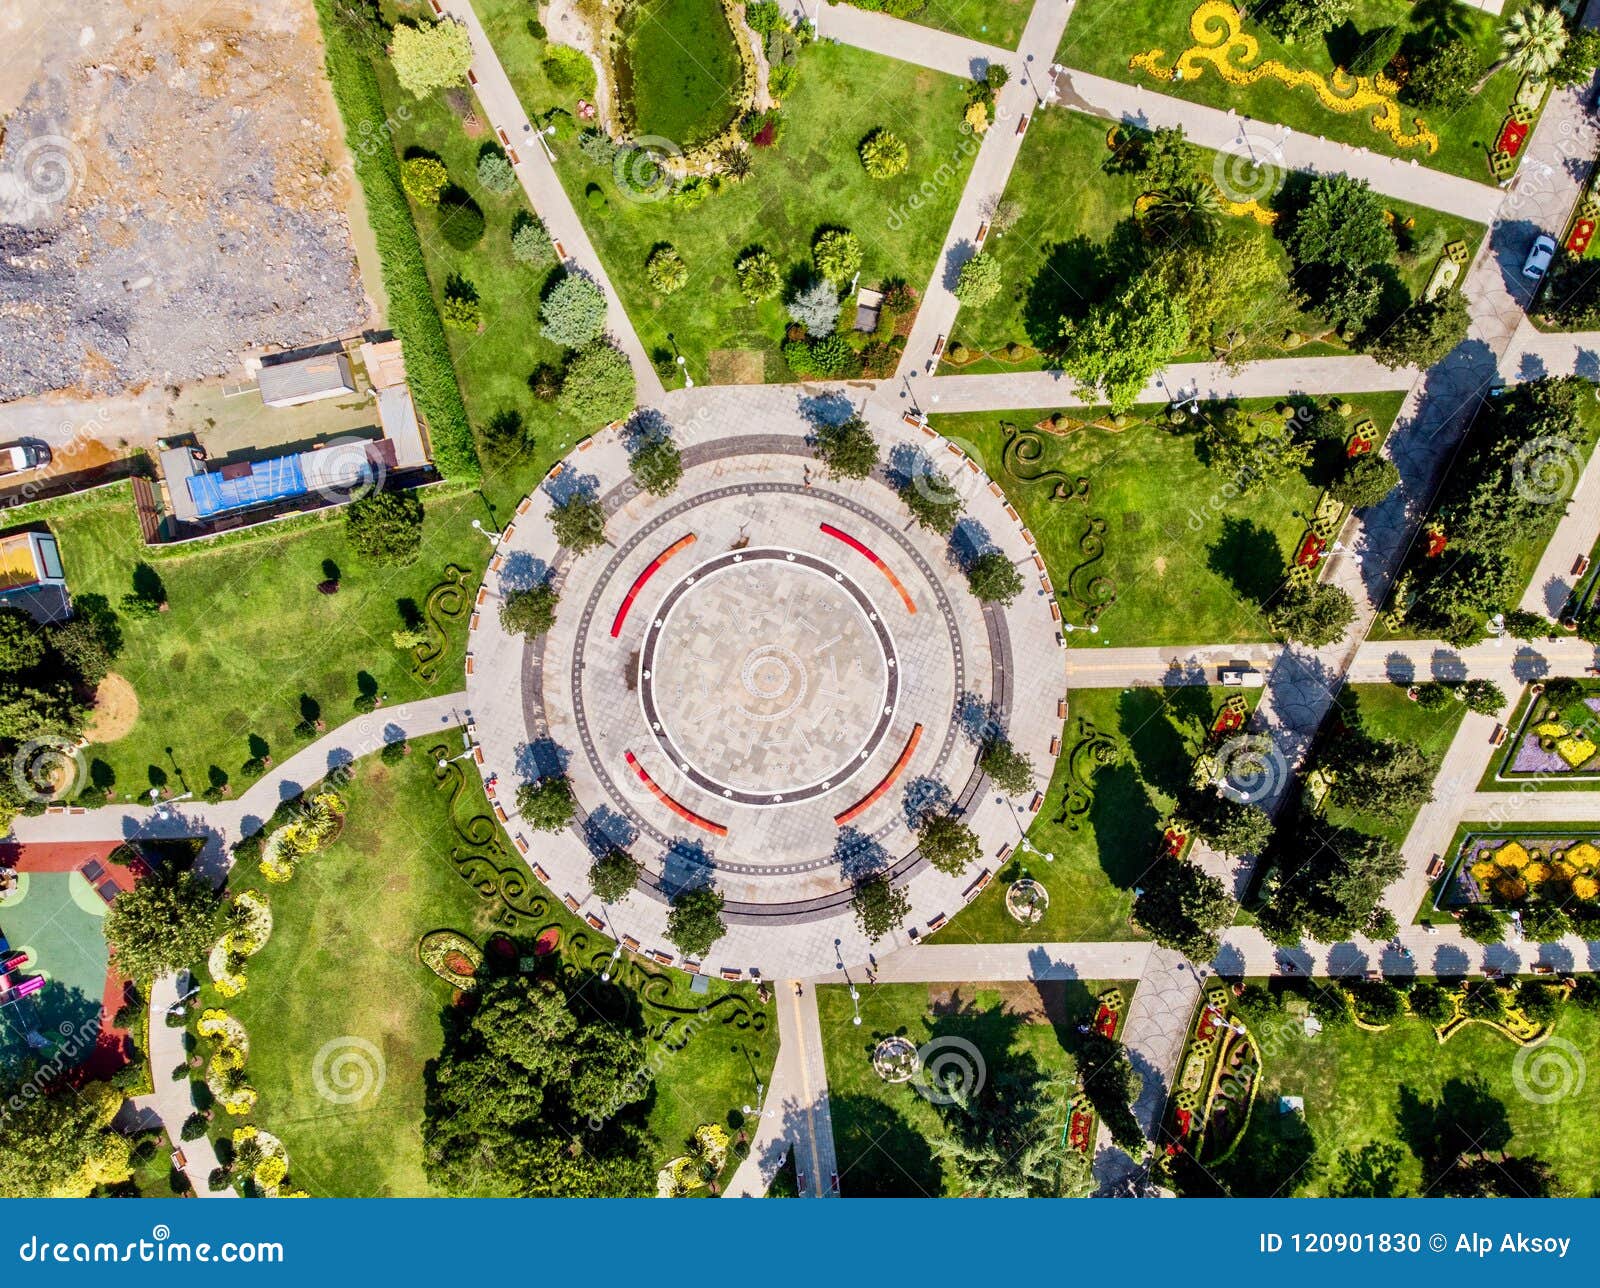 aerial drone view of goztepe 60th year park located in kadikoy, istanbul.